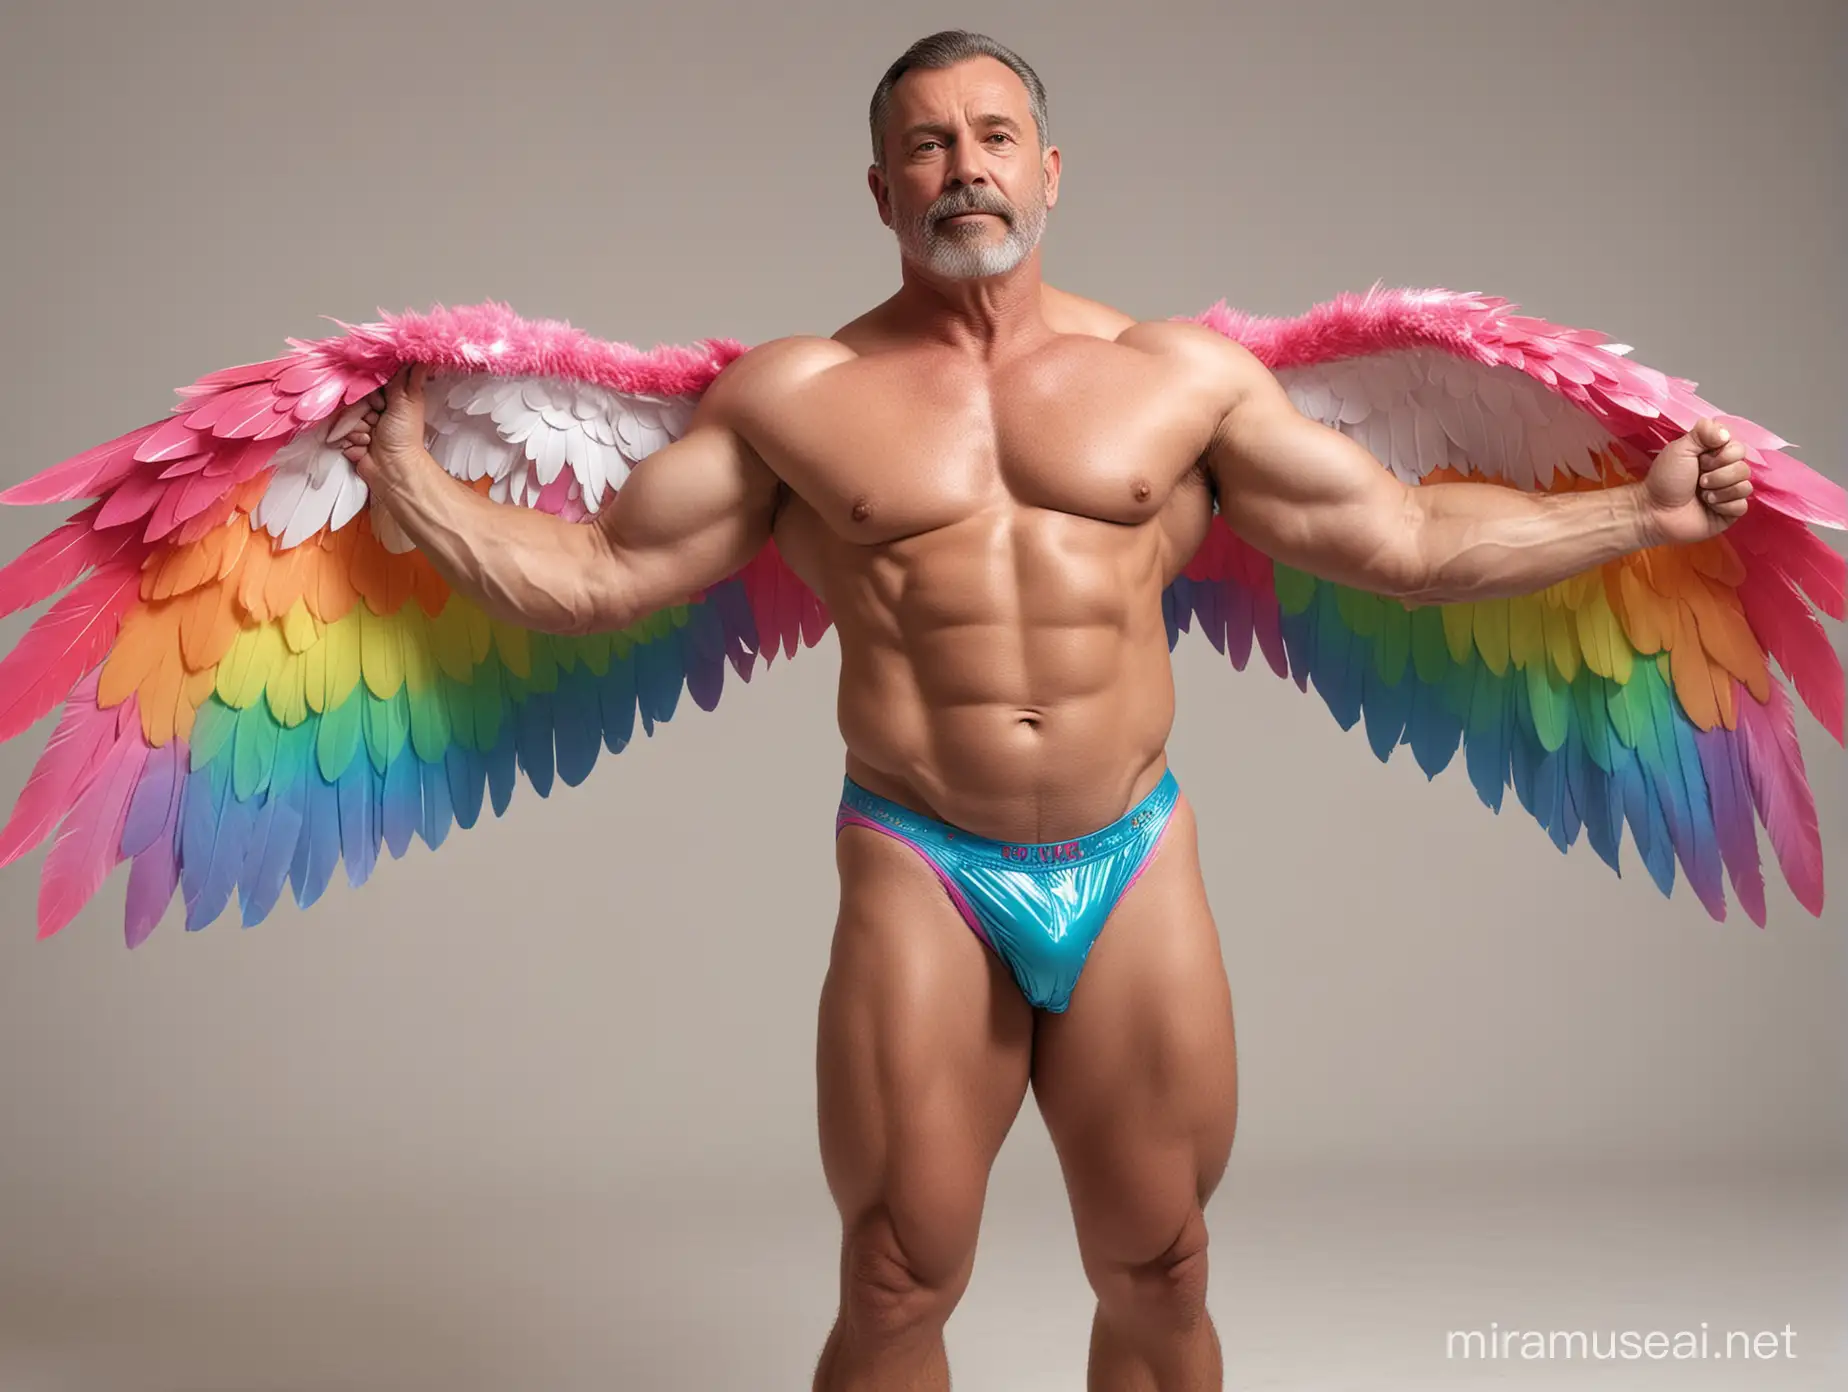 Studio Light Topless 40s Ultra Chunky Bodybuilder Daddy Wearing Multi-Highlighter Bright Rainbow Colored See Through huge Eagle Wings Shoulder Jacket short shorts and Flexing Big Strong Arm with Doraemon